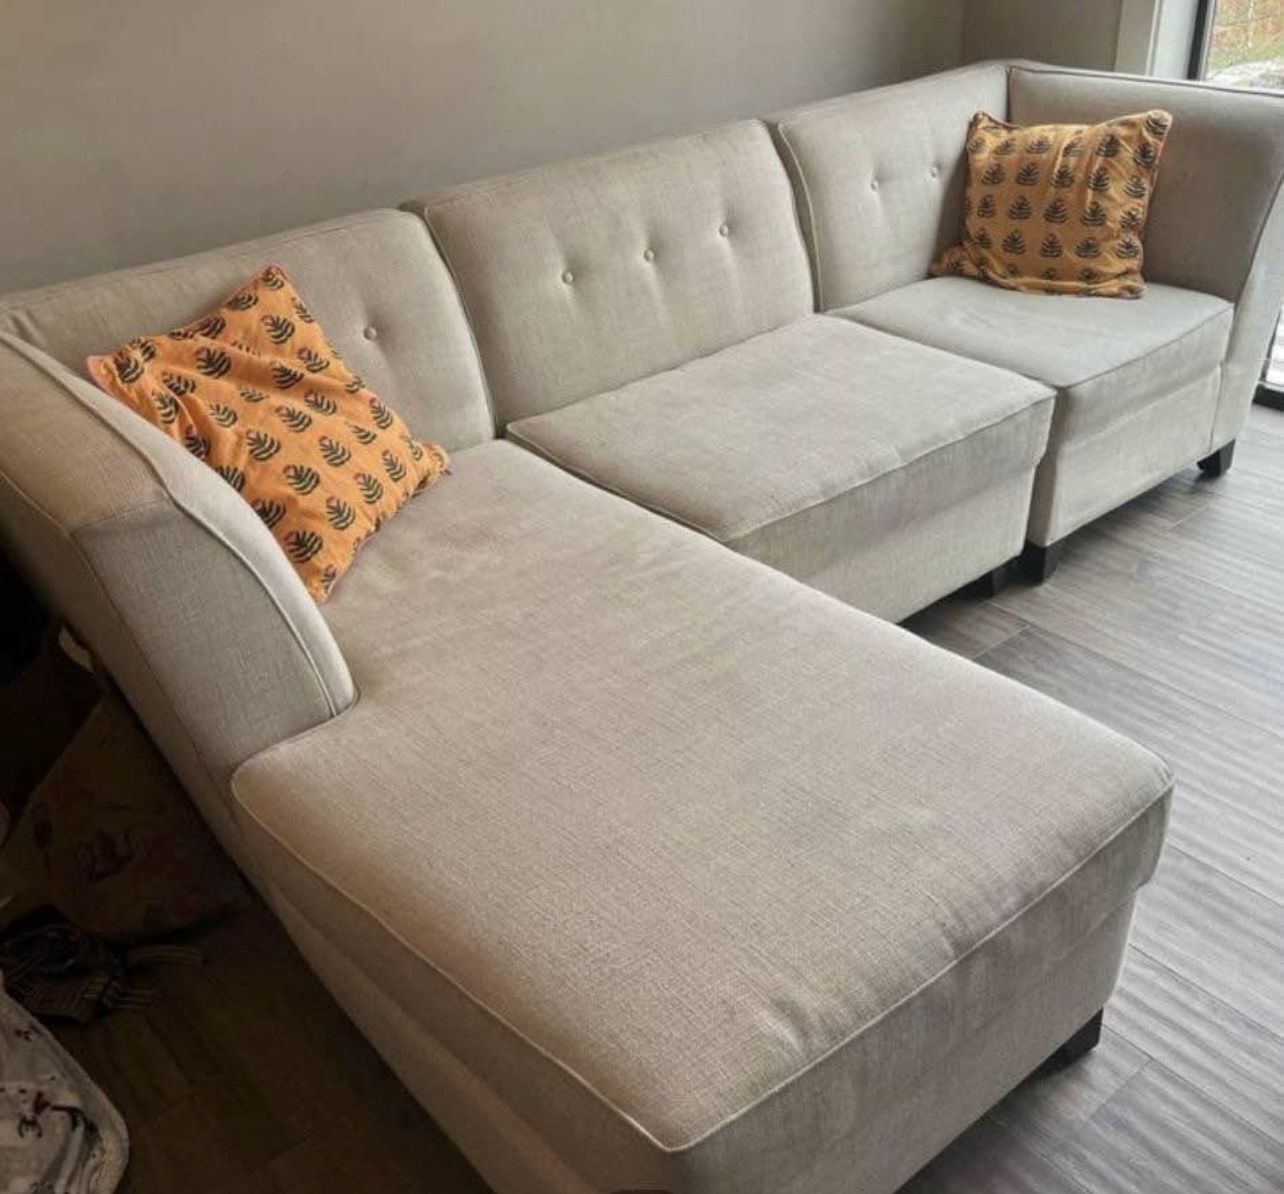 High Quality Beige Couch